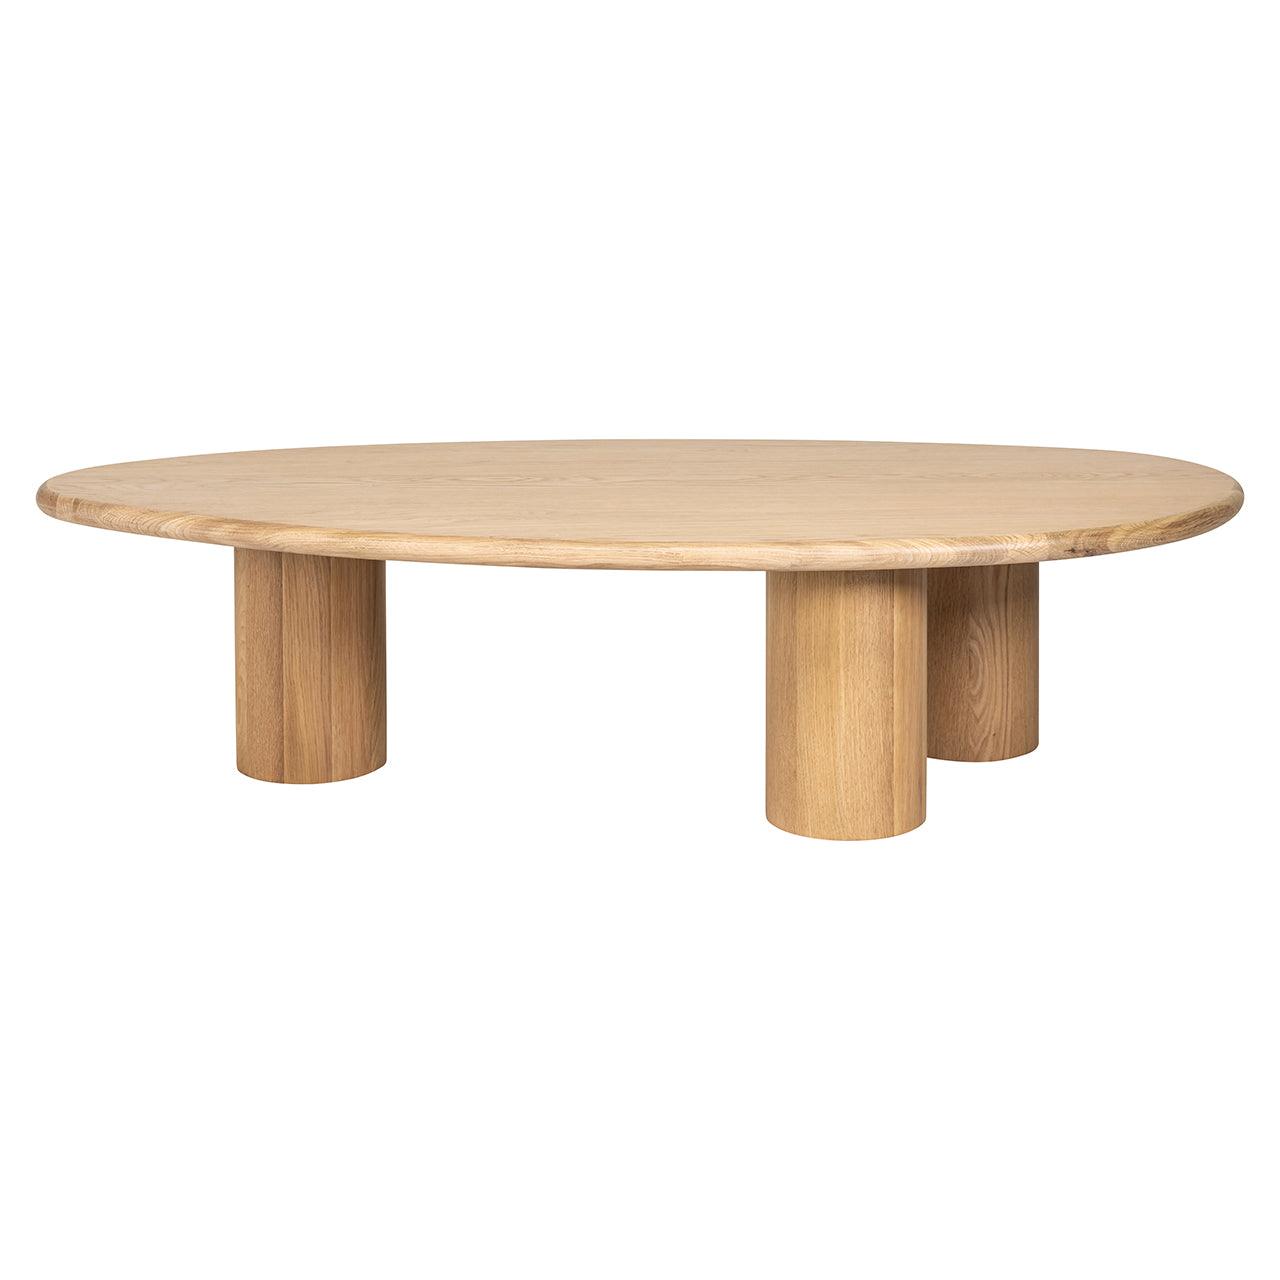 Oakley Natural Oak Wood Coffee Table by Richmond Interiors - Maison Rêves UK